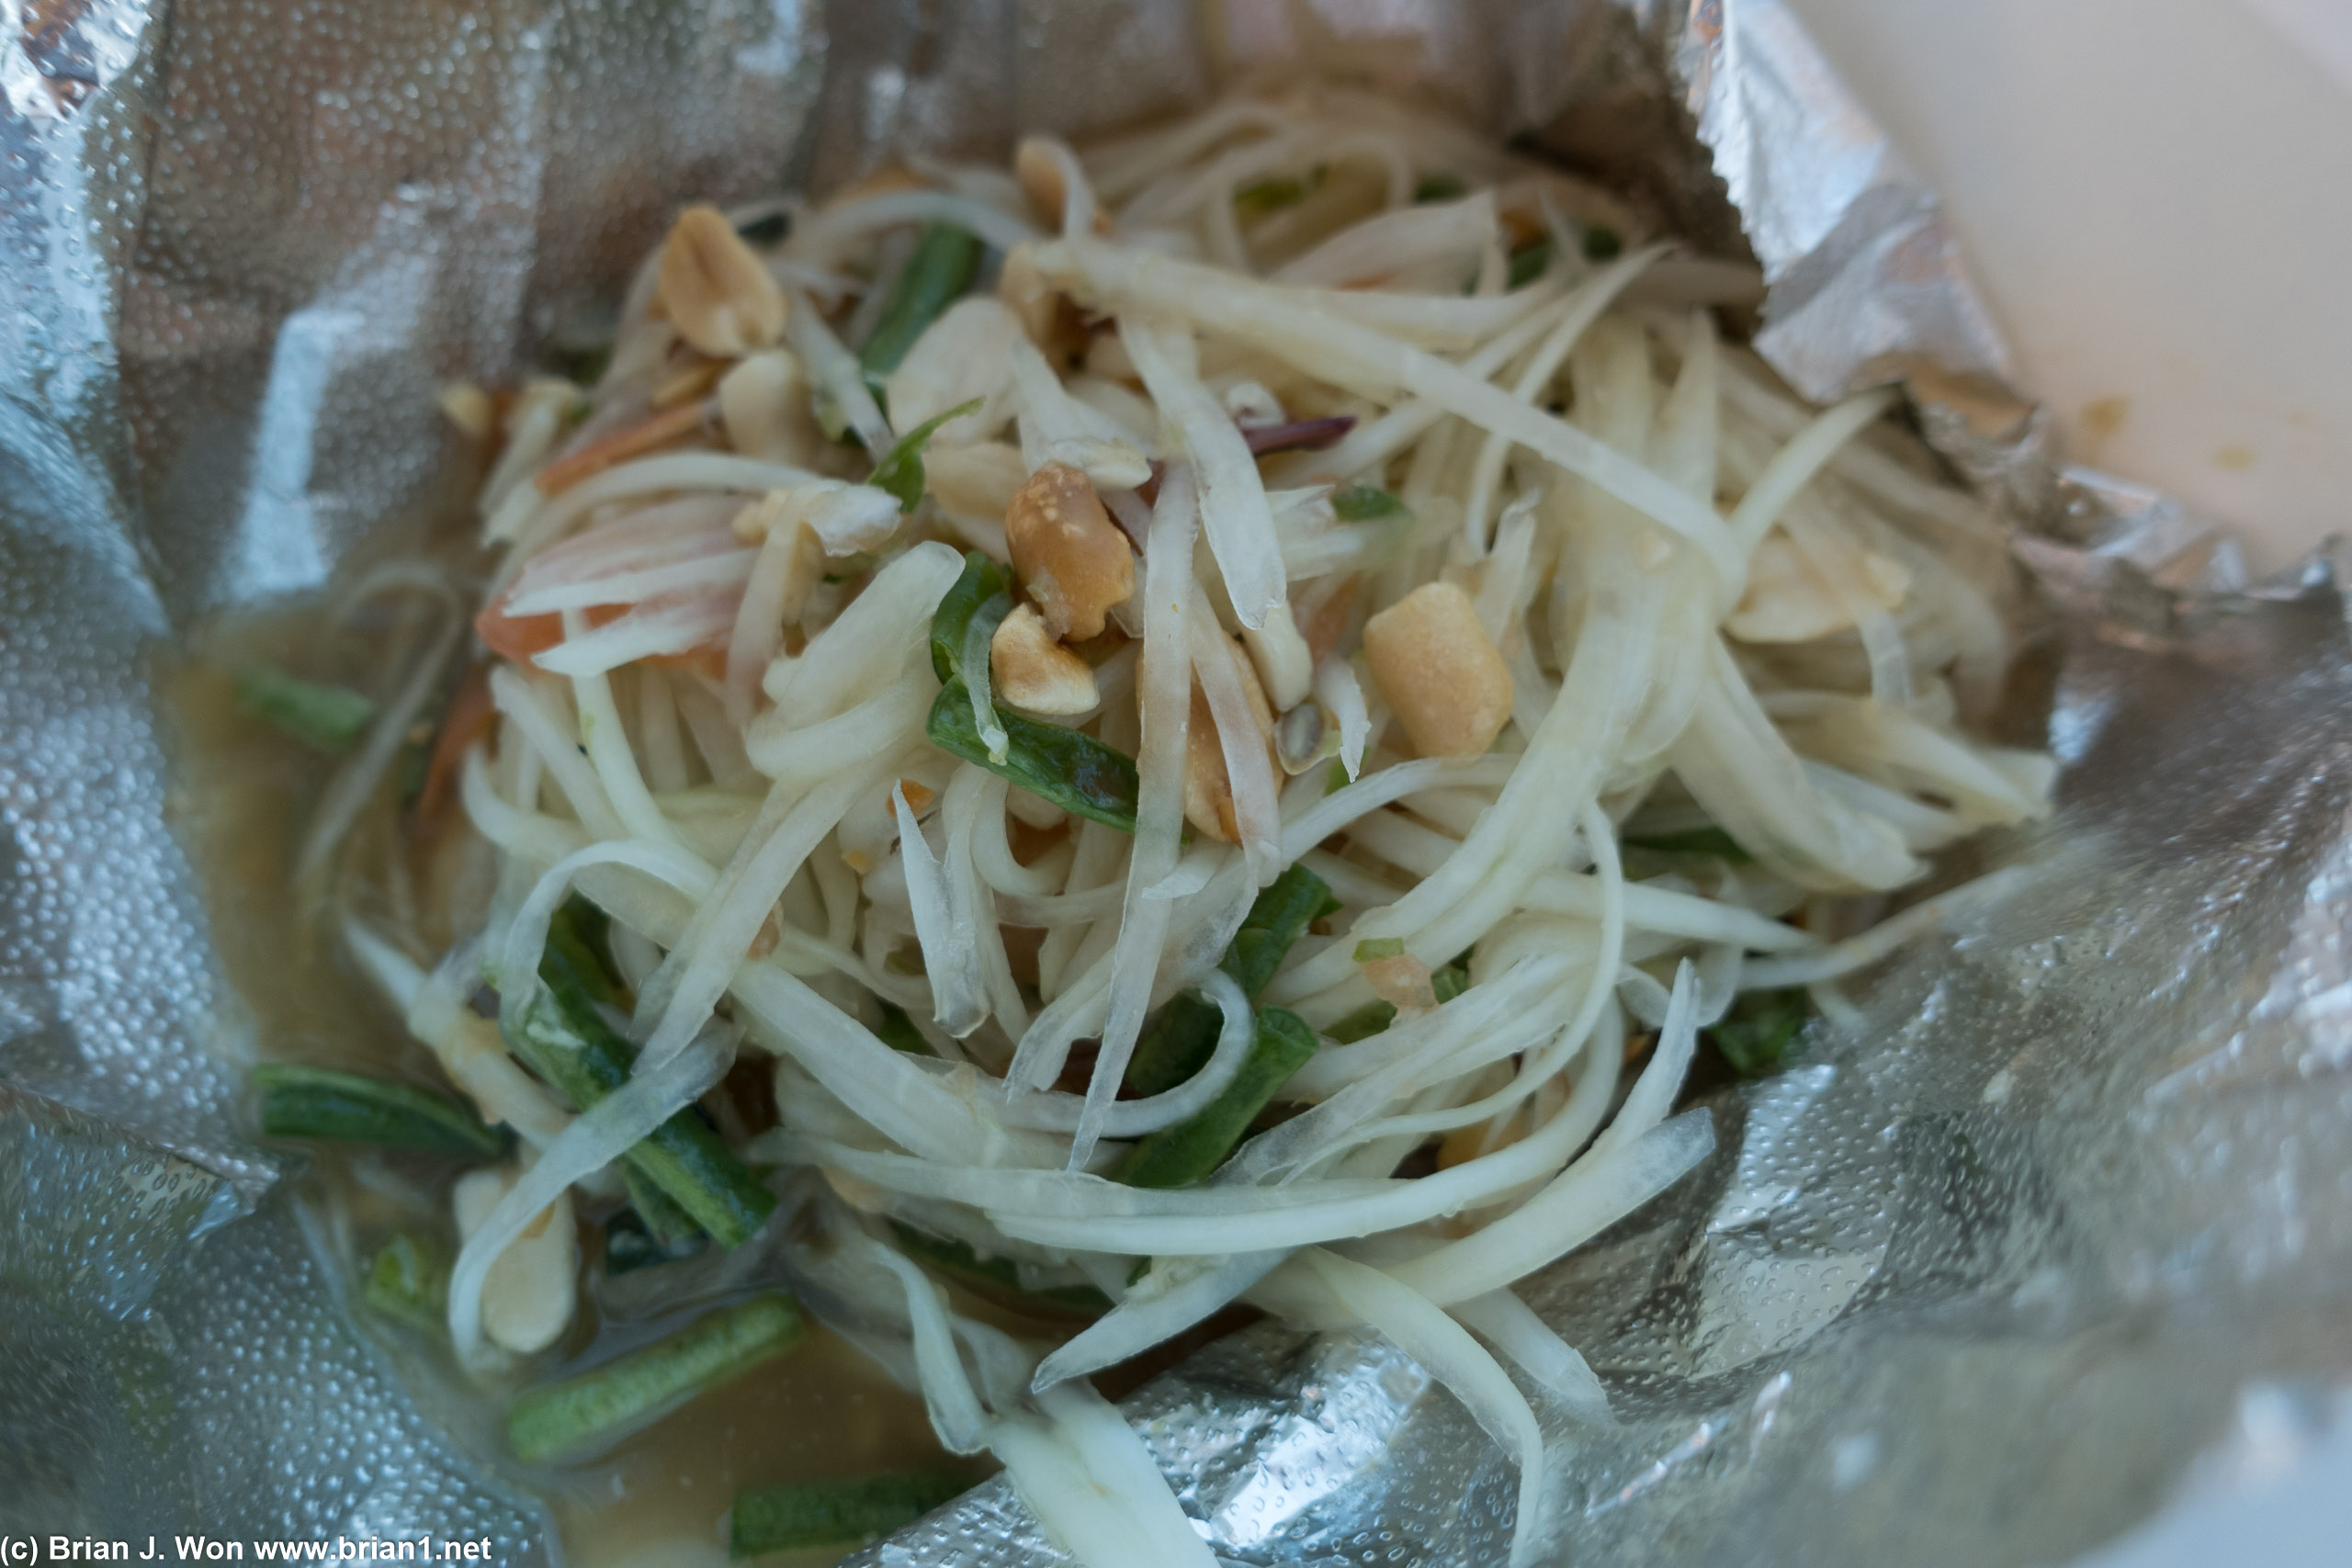 Som Tam from Sanook at the same ghost kitchen complex.